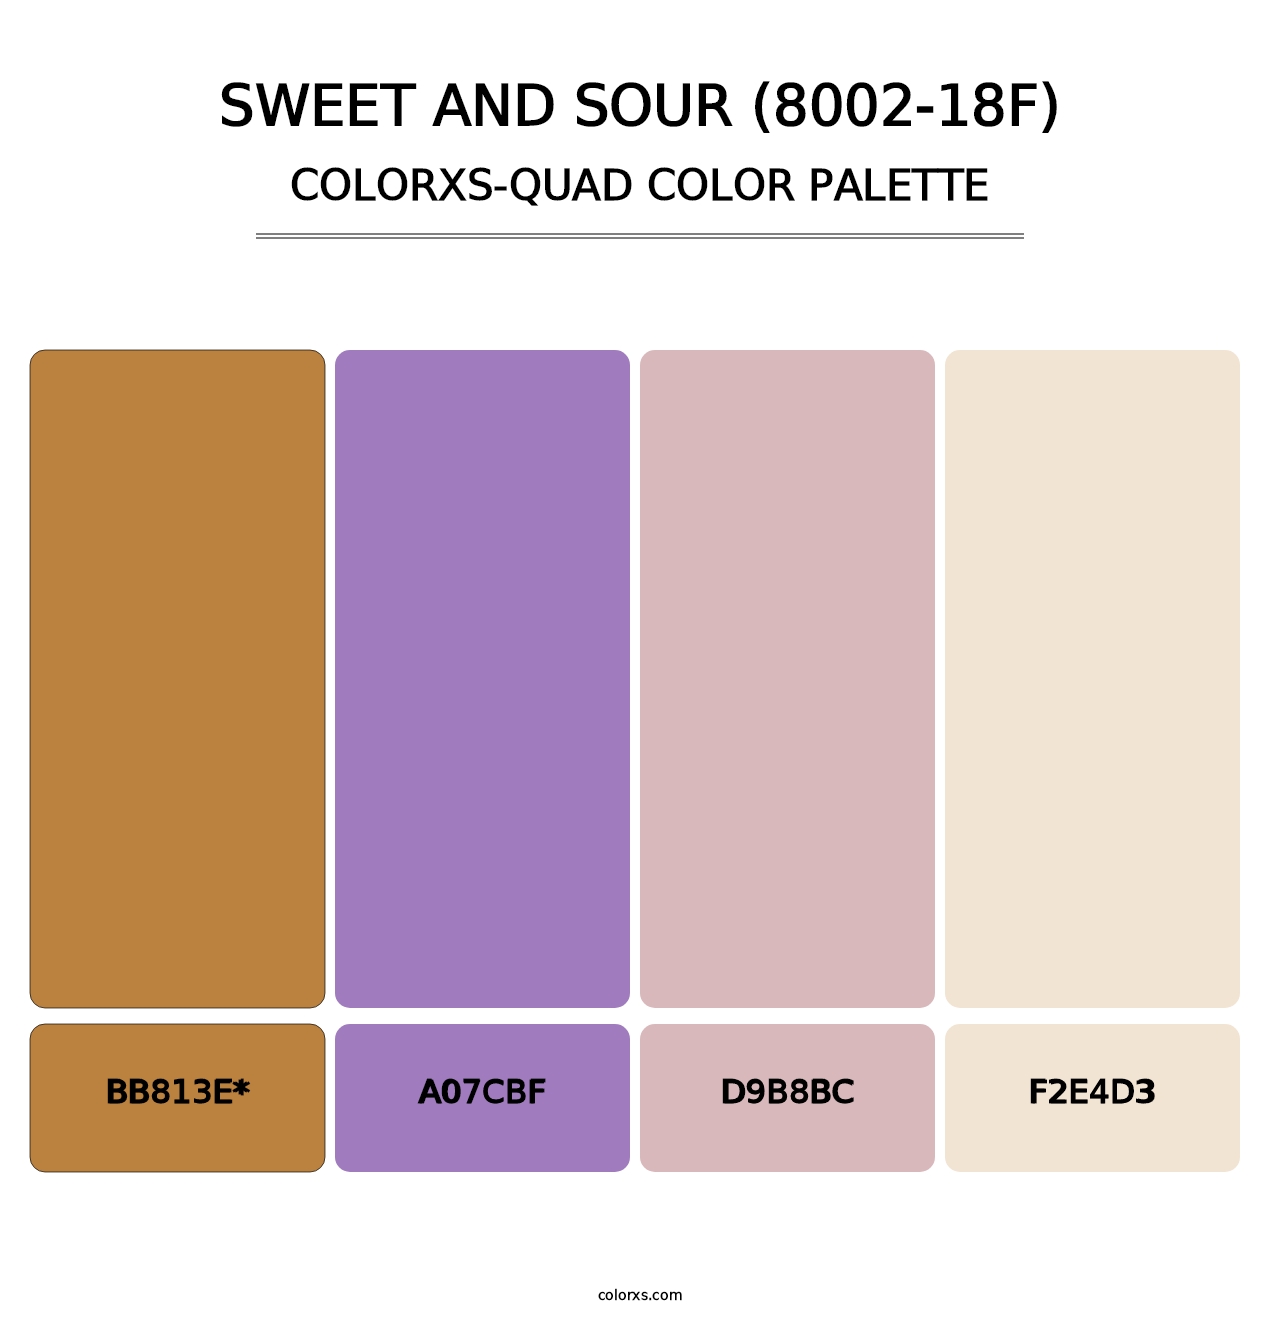 Sweet and Sour (8002-18F) - Colorxs Quad Palette